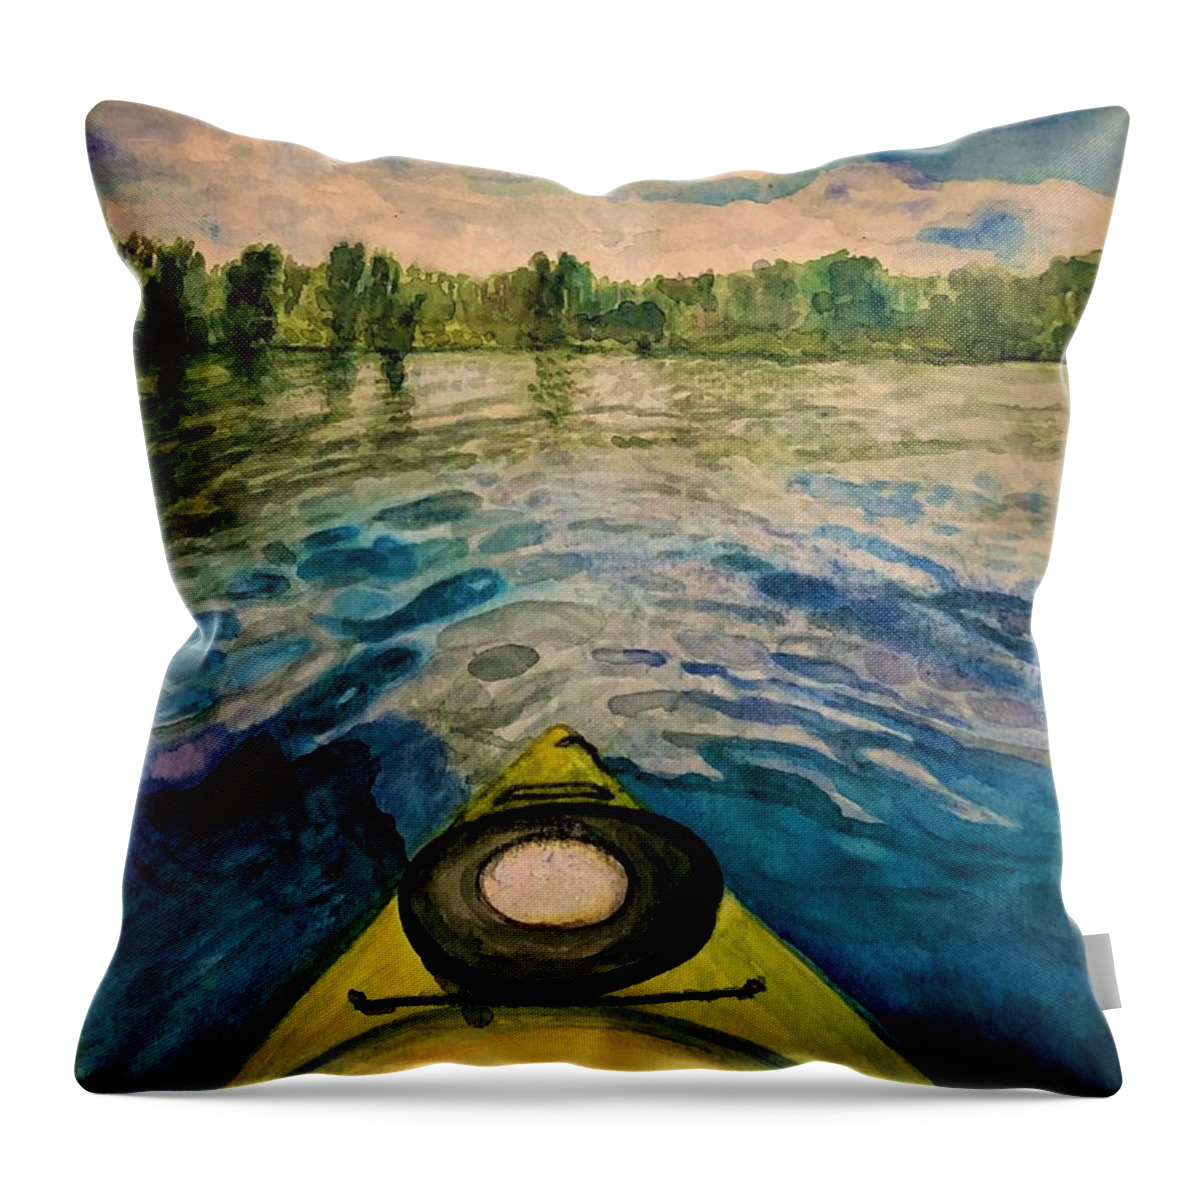 Kayaking Throw Pillow featuring the painting Kayak Dreams by Deb Stroh-Larson